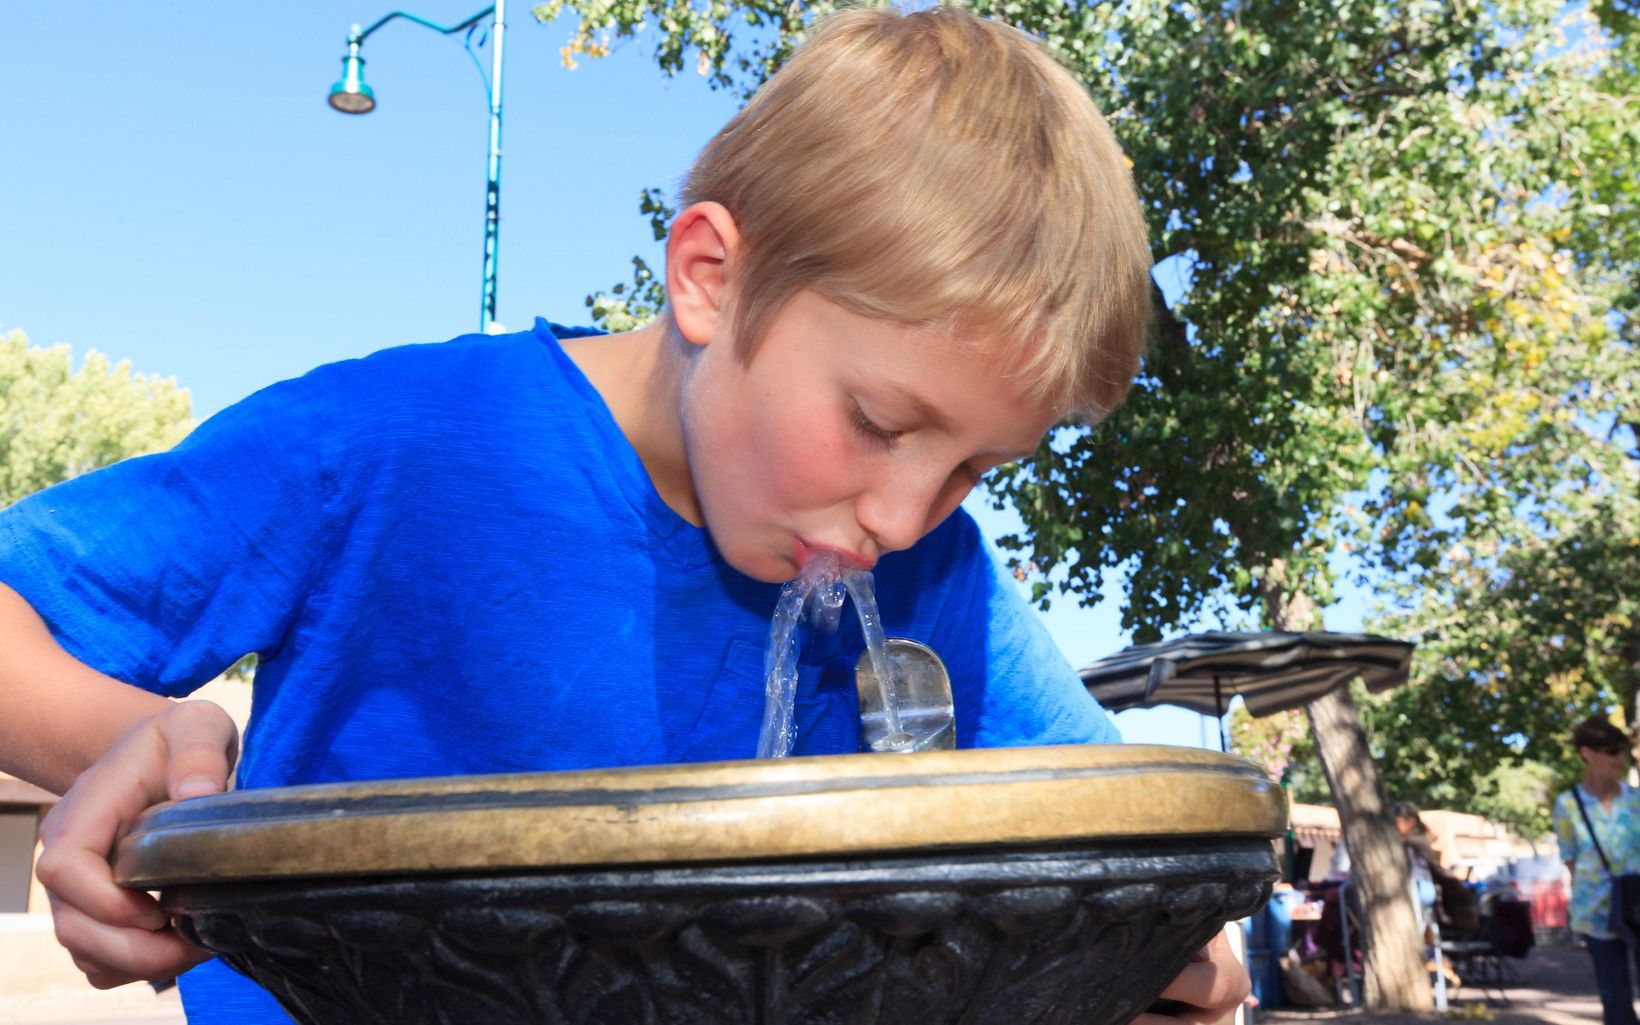 Boy in bright blue t-shirt drinks from water fountain.